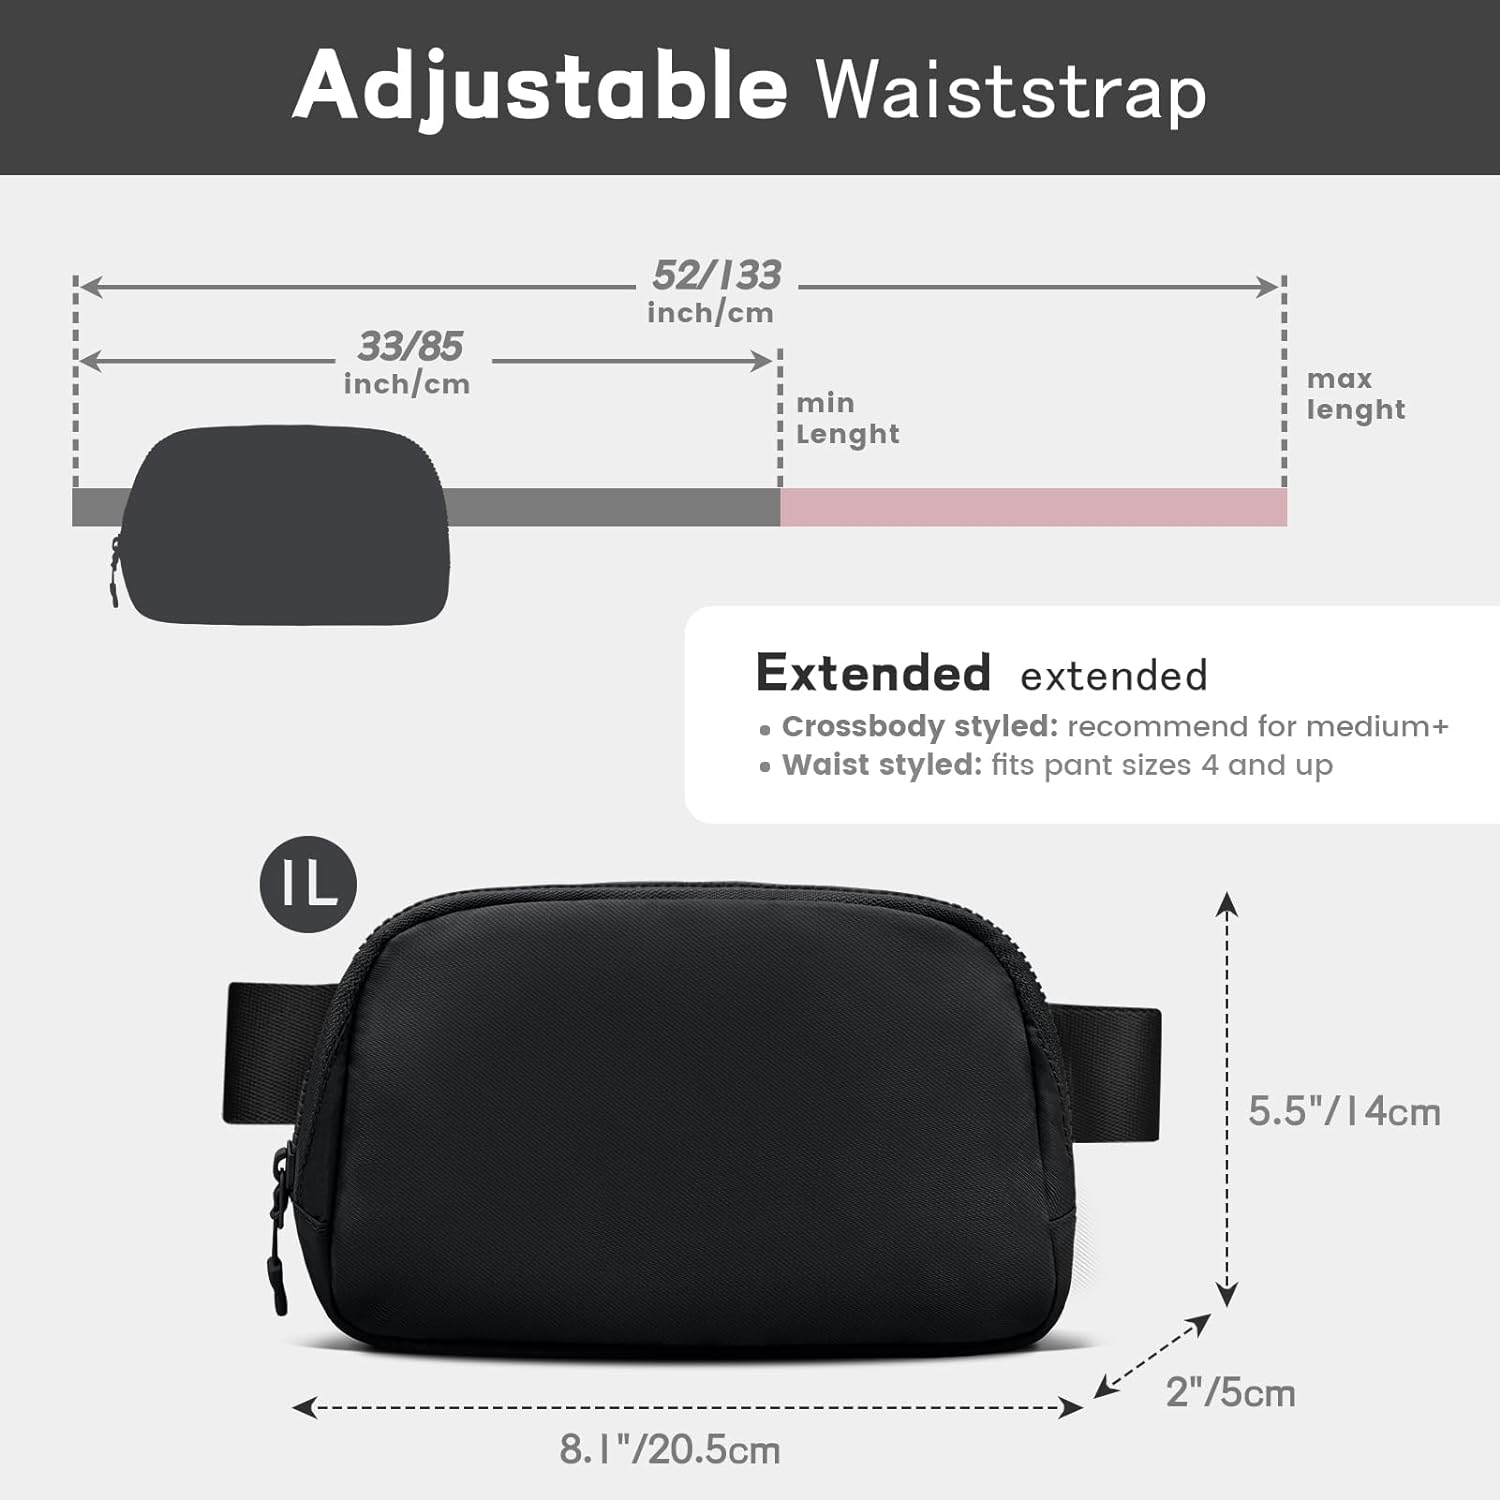 Everywhere Belt Bag for Women, Viewm Waterproof Crossbody Fanny Pack Dupes for Women Men fashion waist packs With Adjustable Strap for Travel Fitness Running Hiking, Black, Adjustable Mini Waterproof Crossbody Fashion Fanny Pack